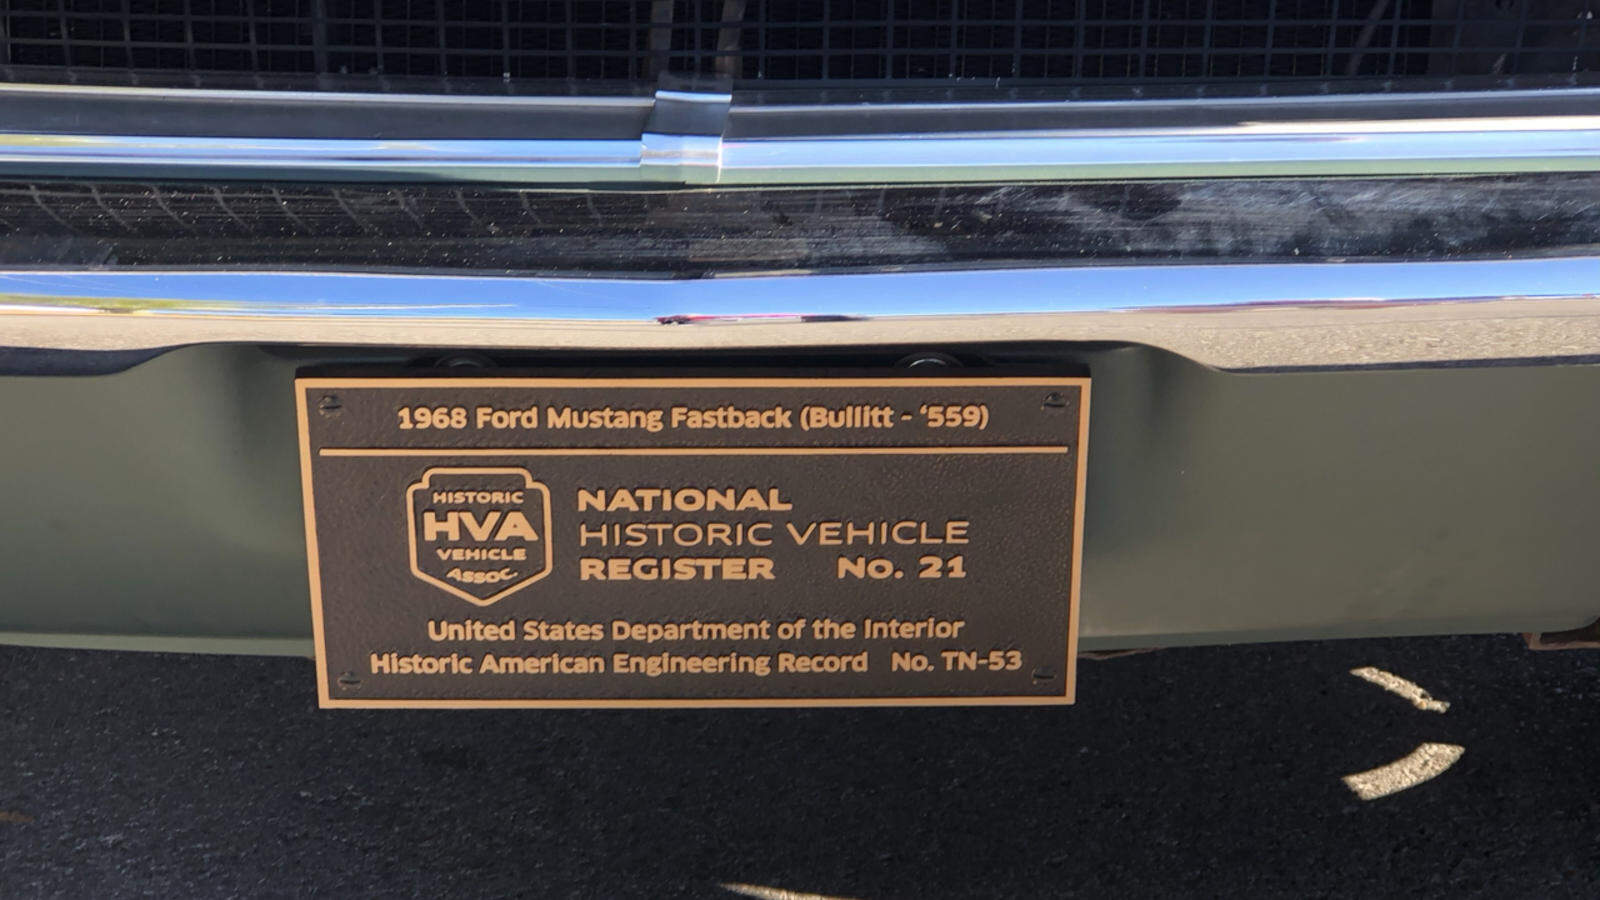 The historical marker certifies the actual 1968 Mustang Driven by Steve McQueen in the movie Bullitt